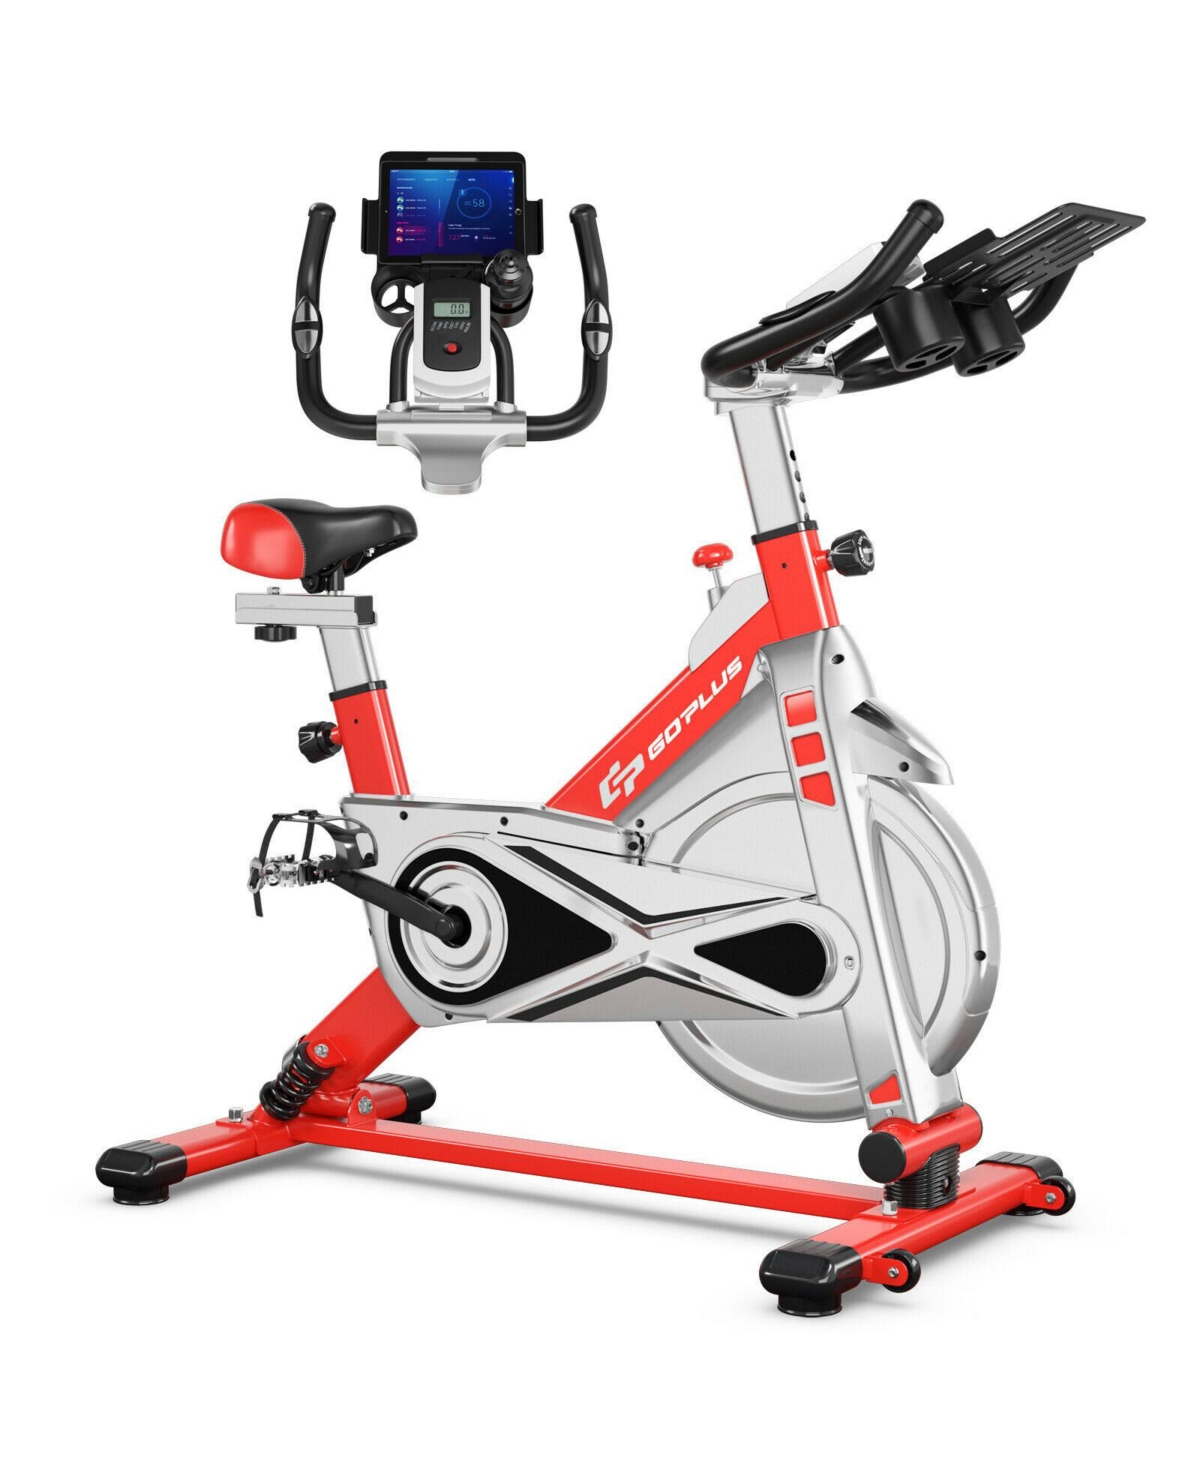 Indoor Stationary Exercise Cycle Bike Bicycle Workout - Red